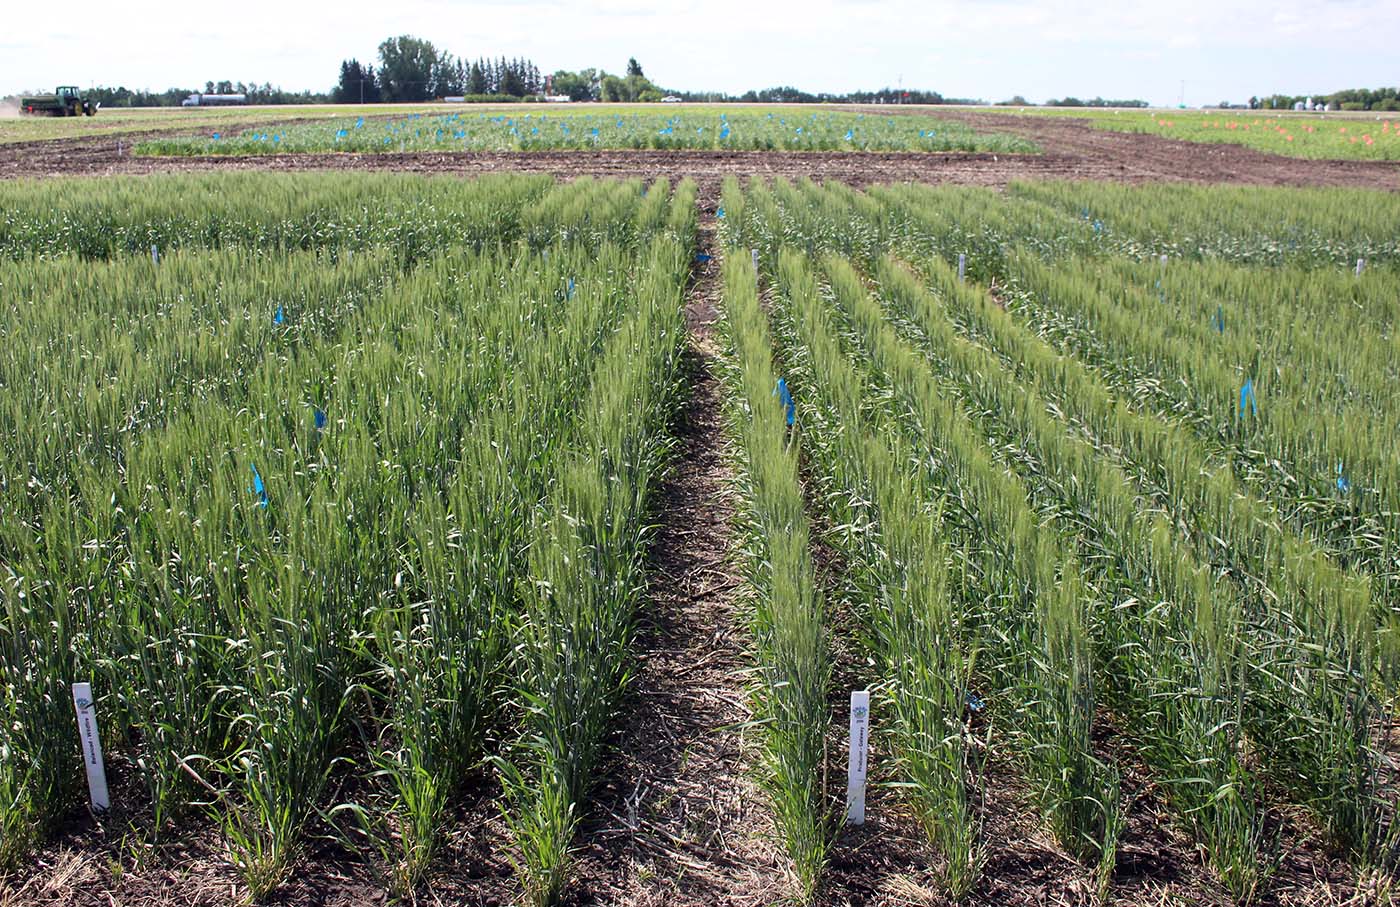 2021 DUC winter wheat plots at the Carberry research centre show high-yielding variety to the left grown with less fertilizer (photo DUC)